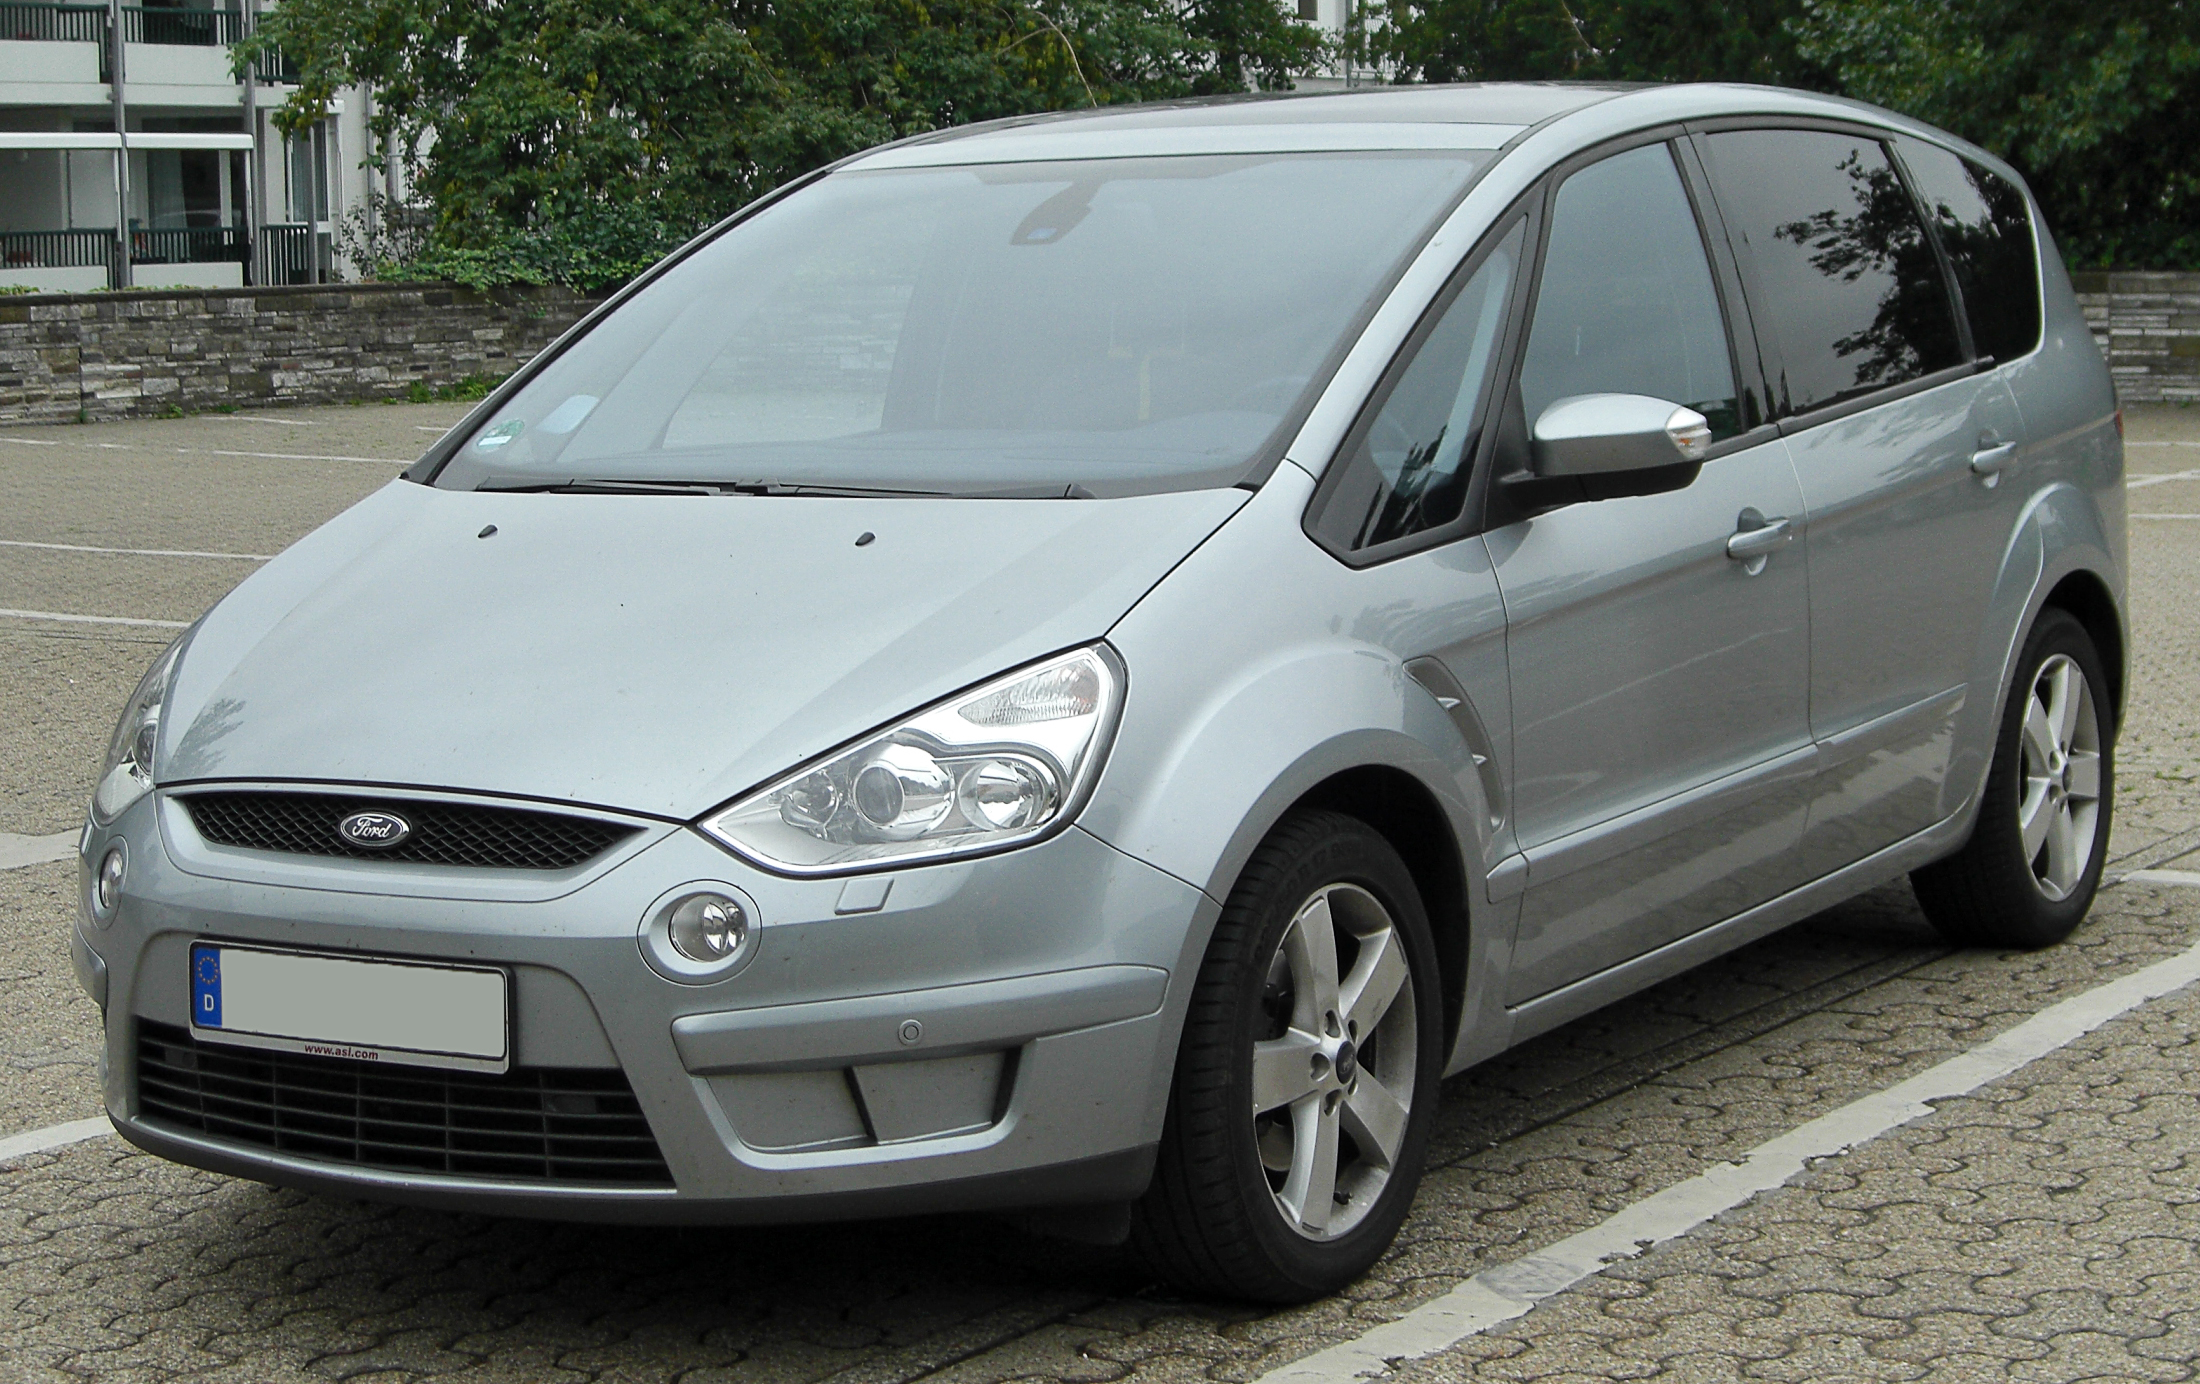 Ford S-Max - Wikidata